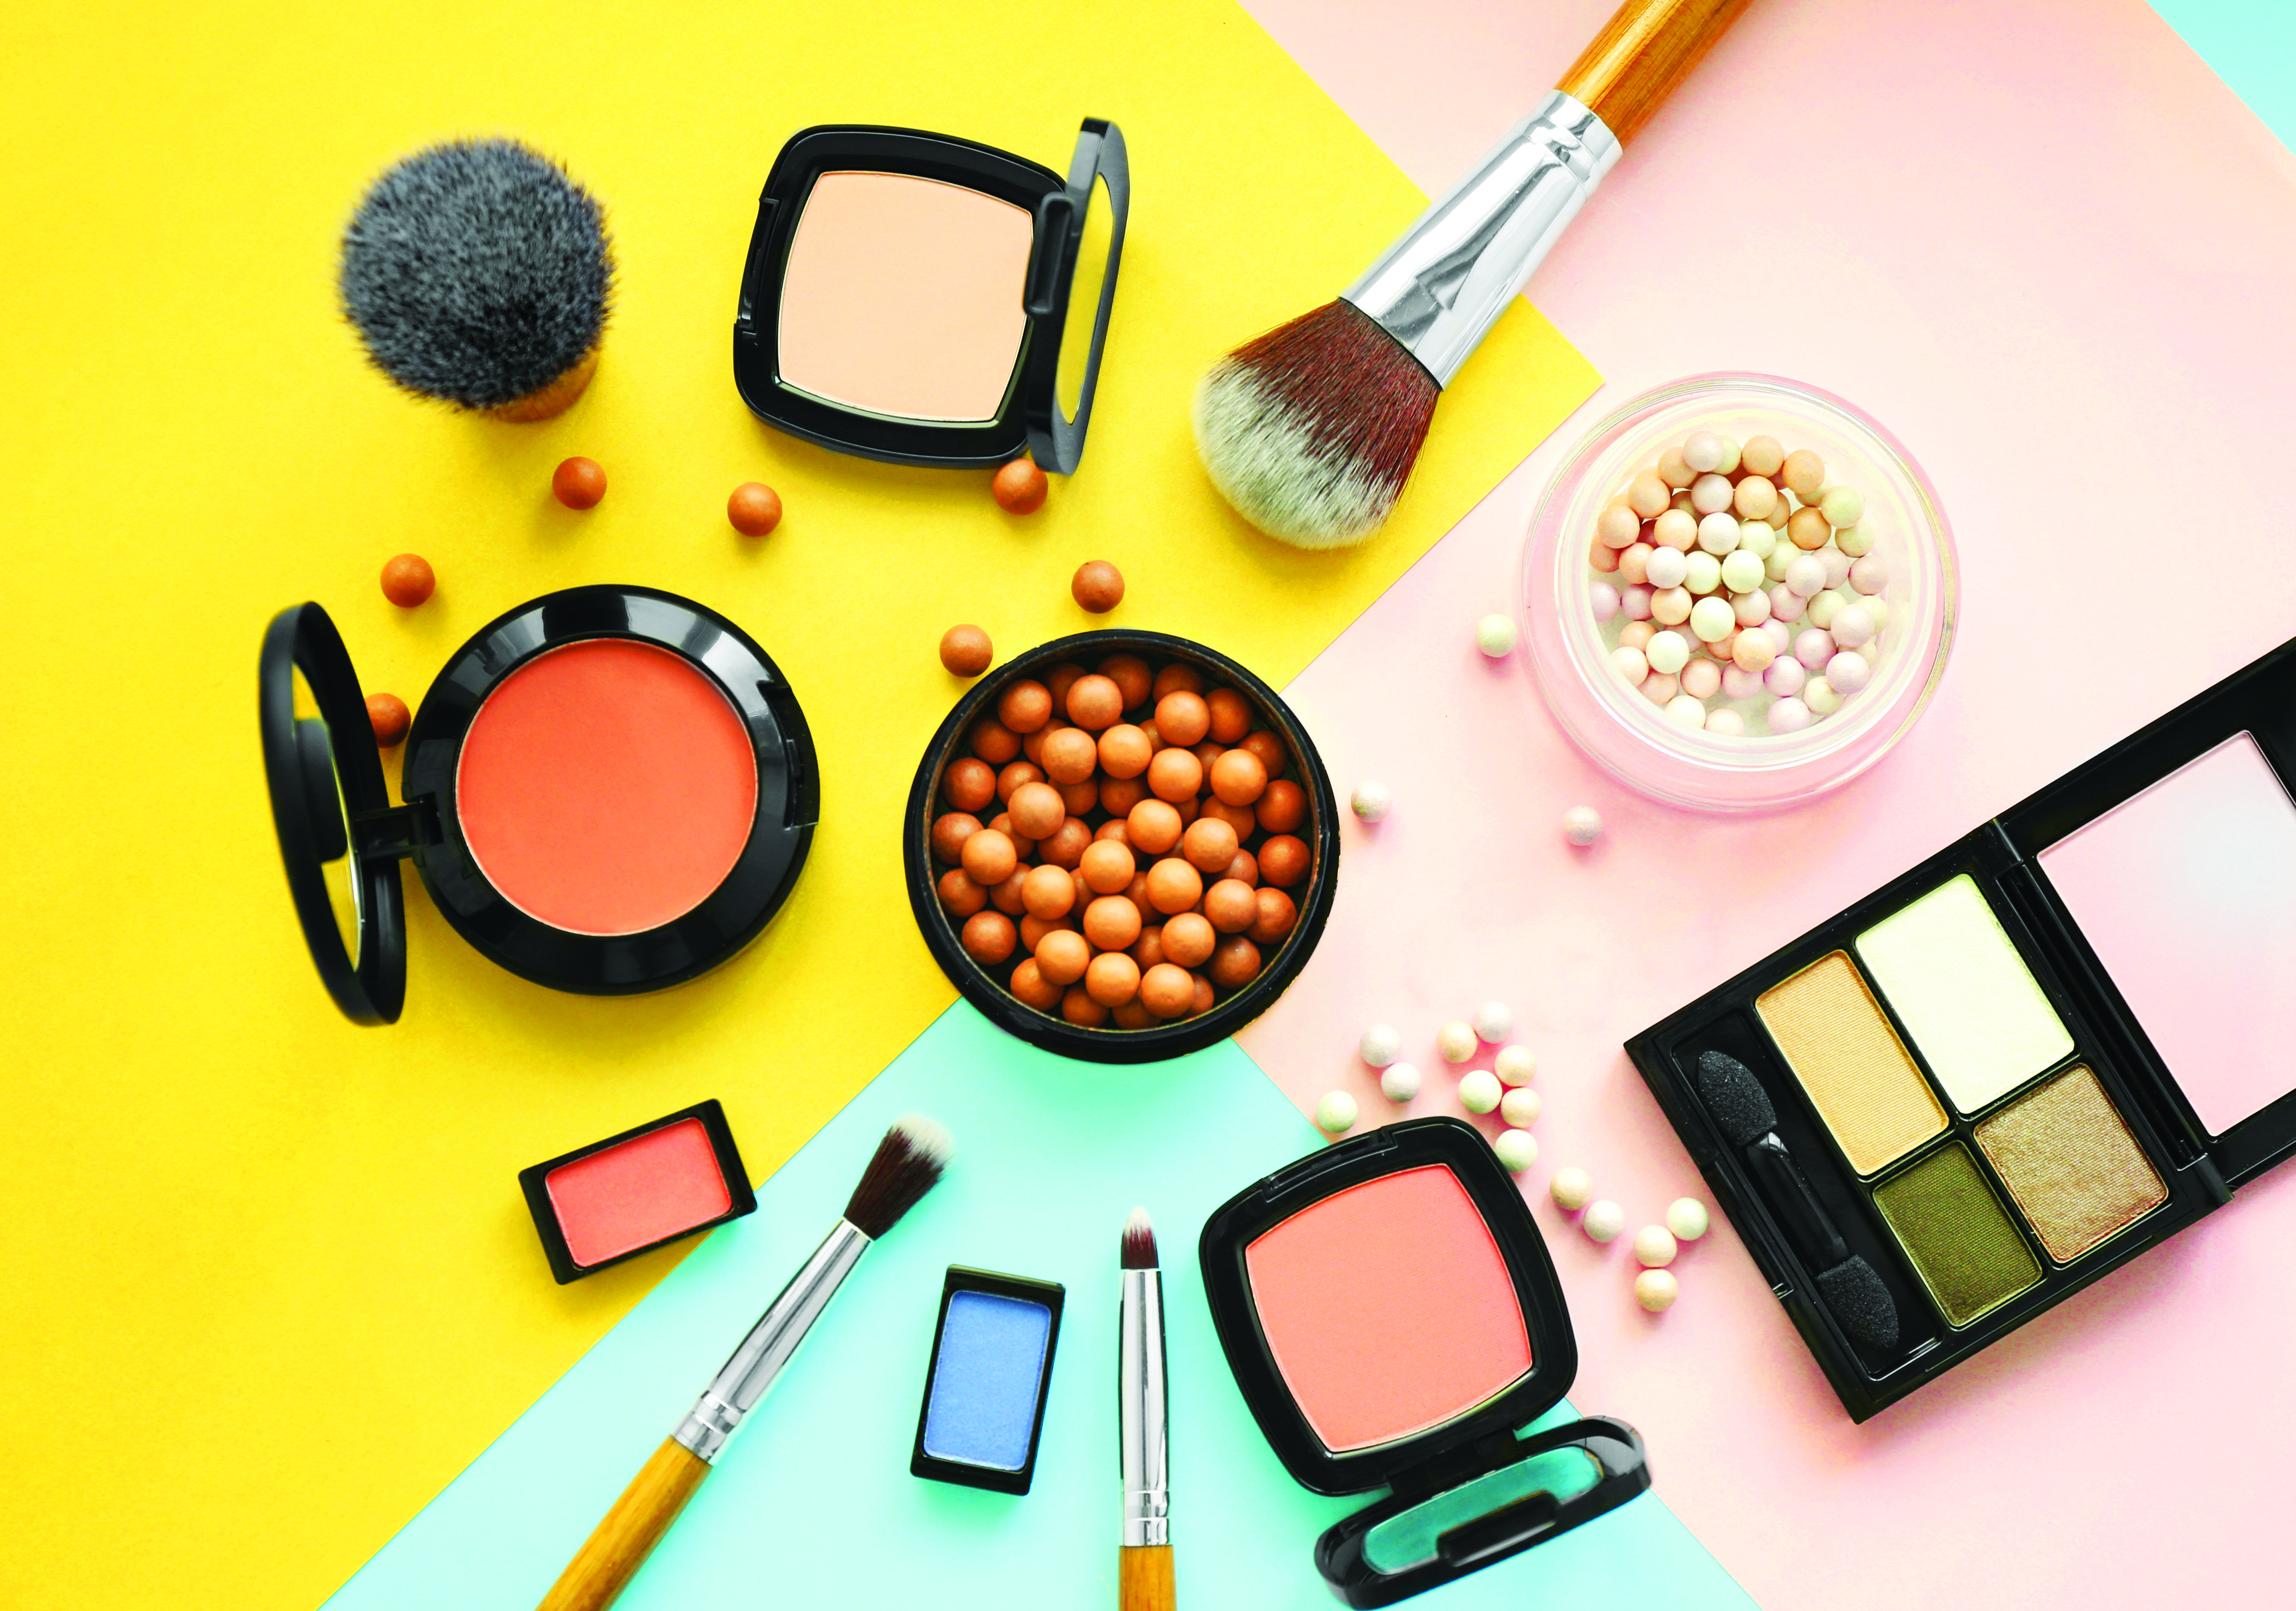 Makeup tips: How to get your makeup to last all day